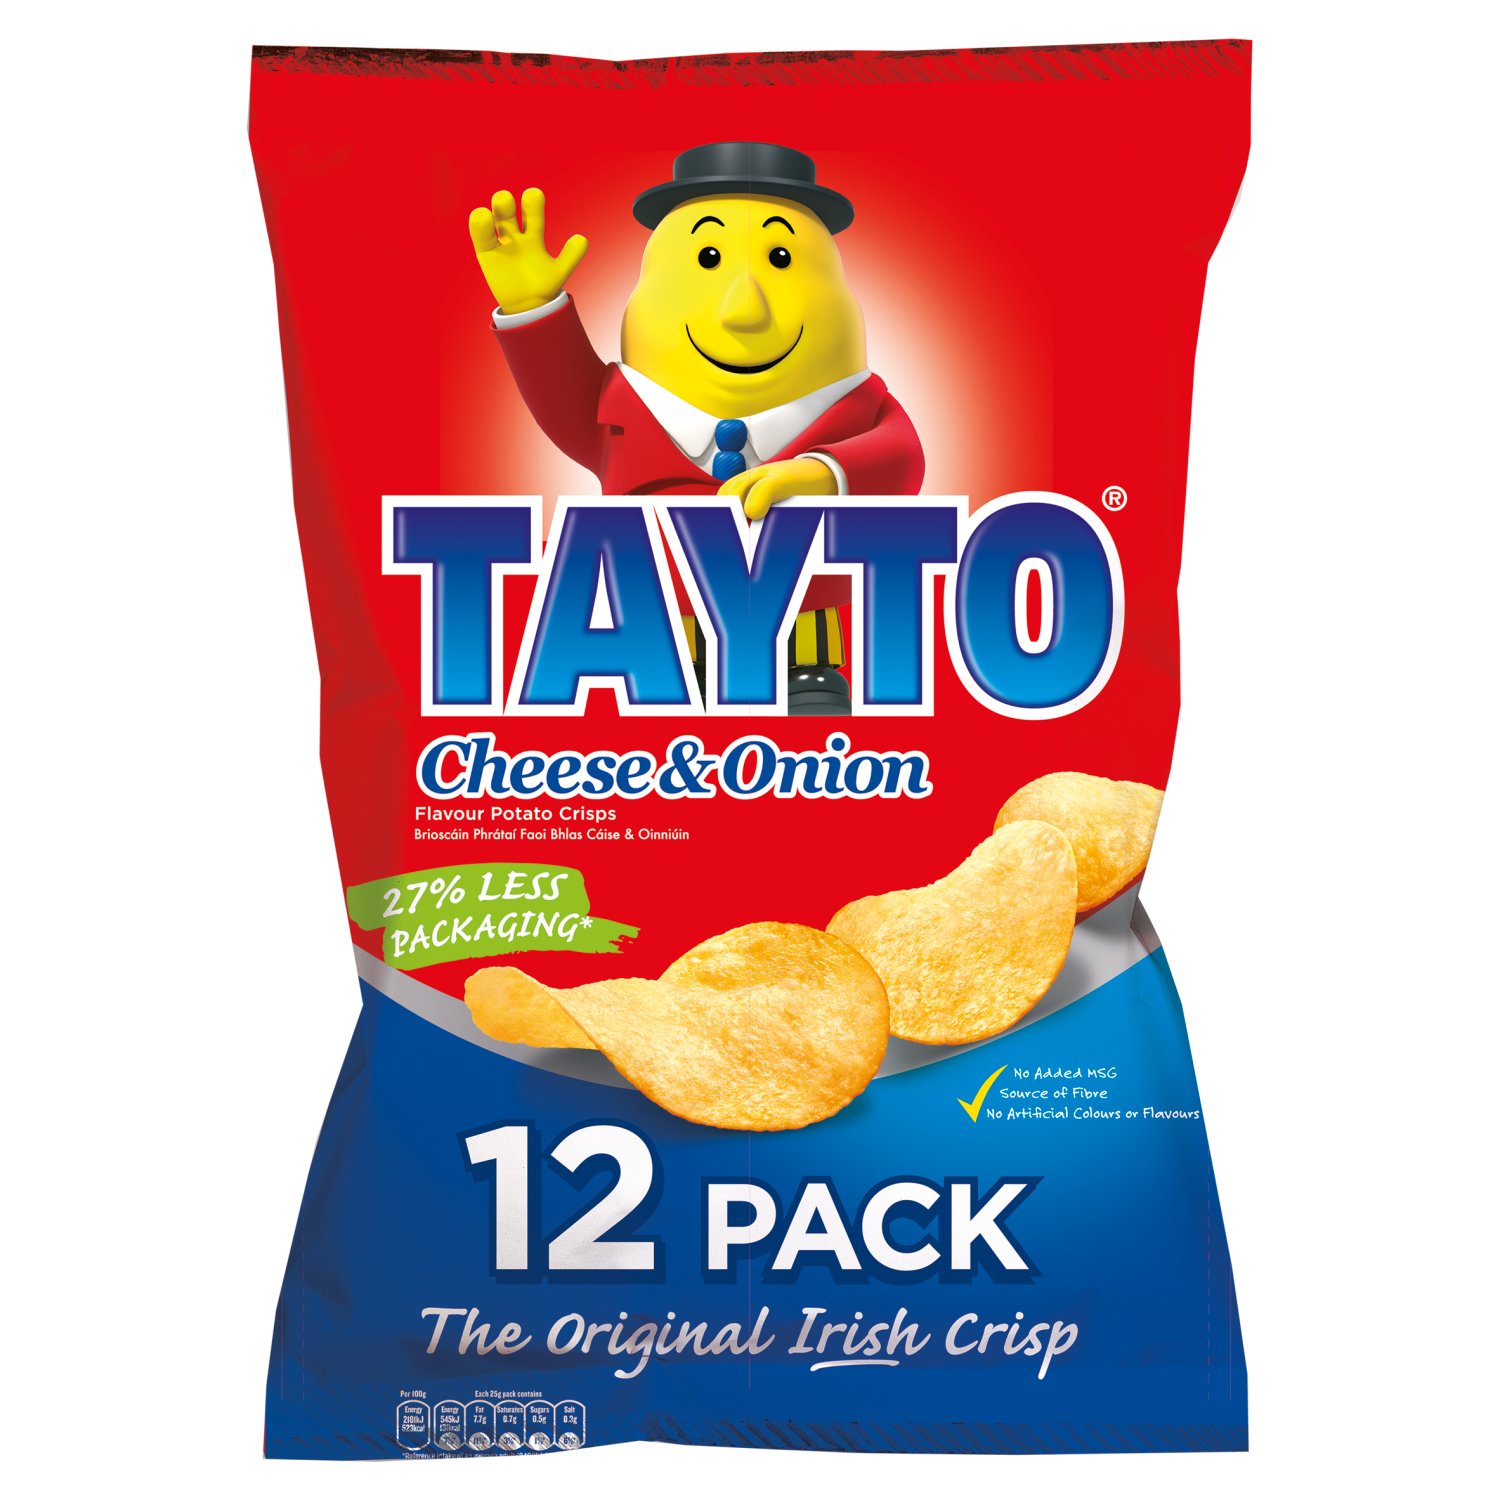 Tayto Cheese & Onion Multipack Crisps 12 Pack 300g